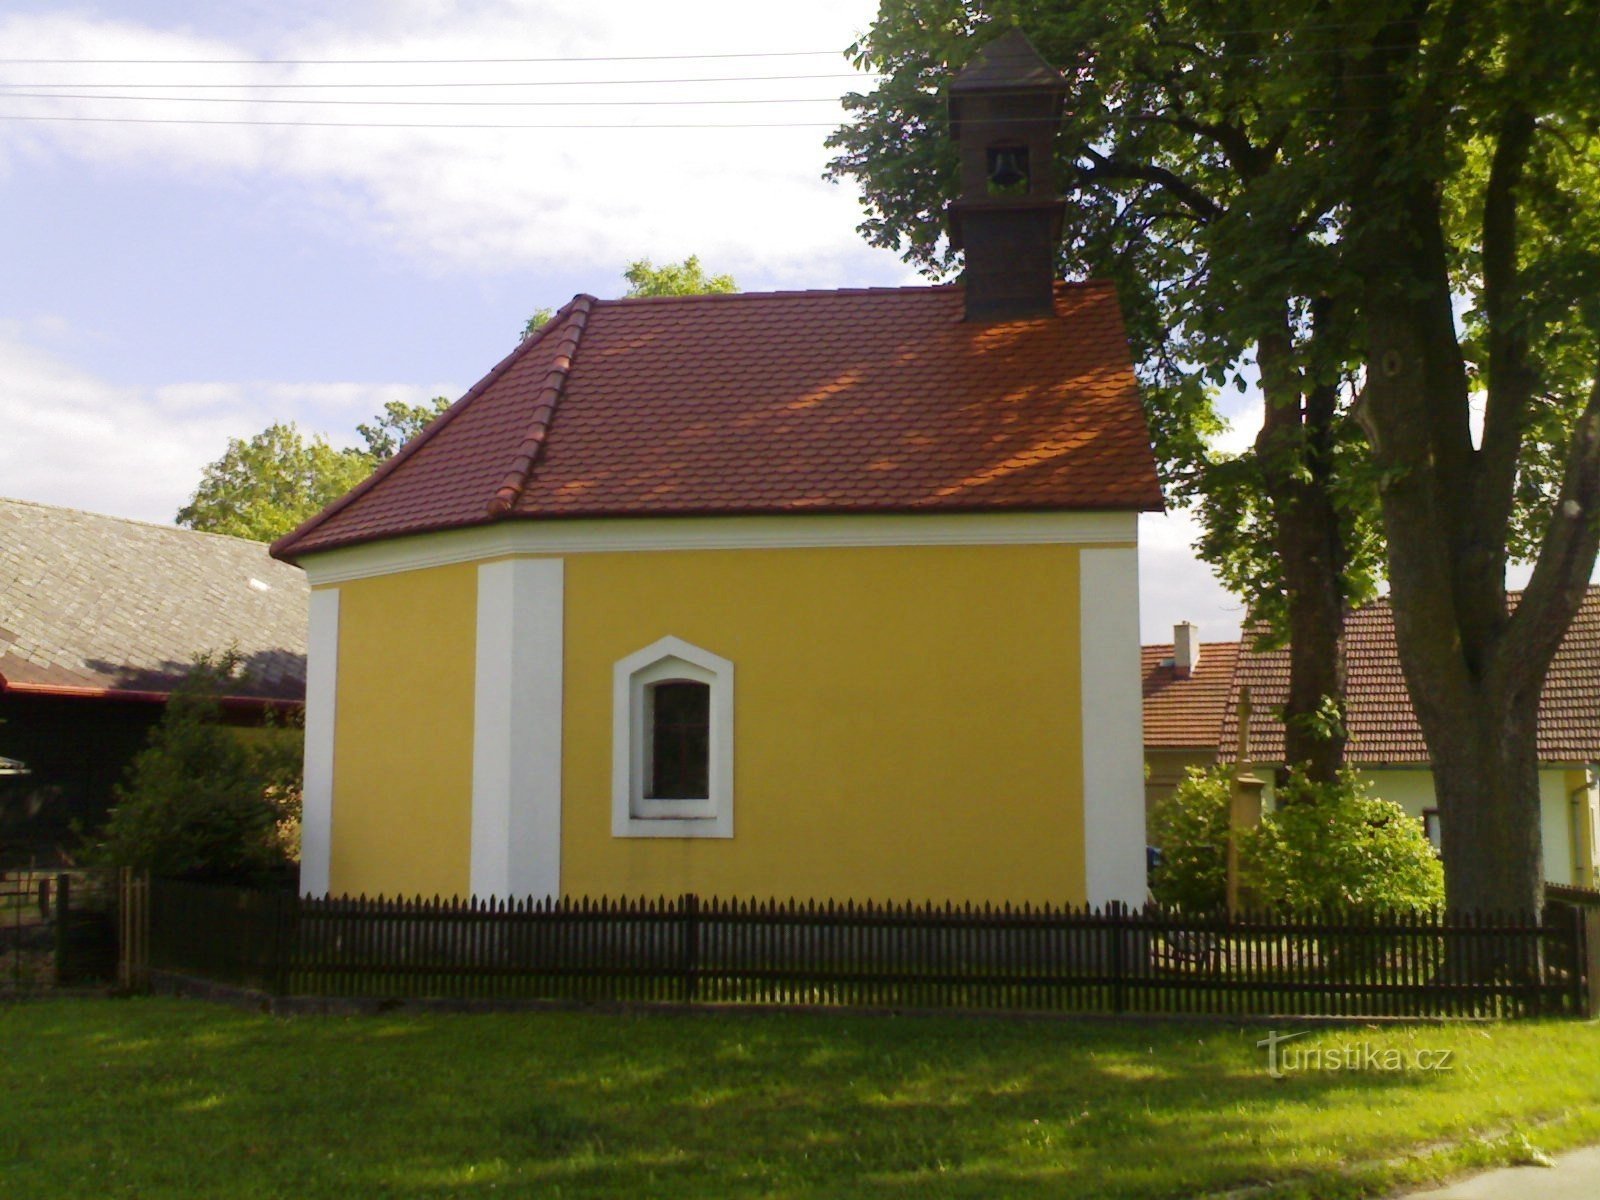 Ježkovice - chapel of Our Lady of Lourdes